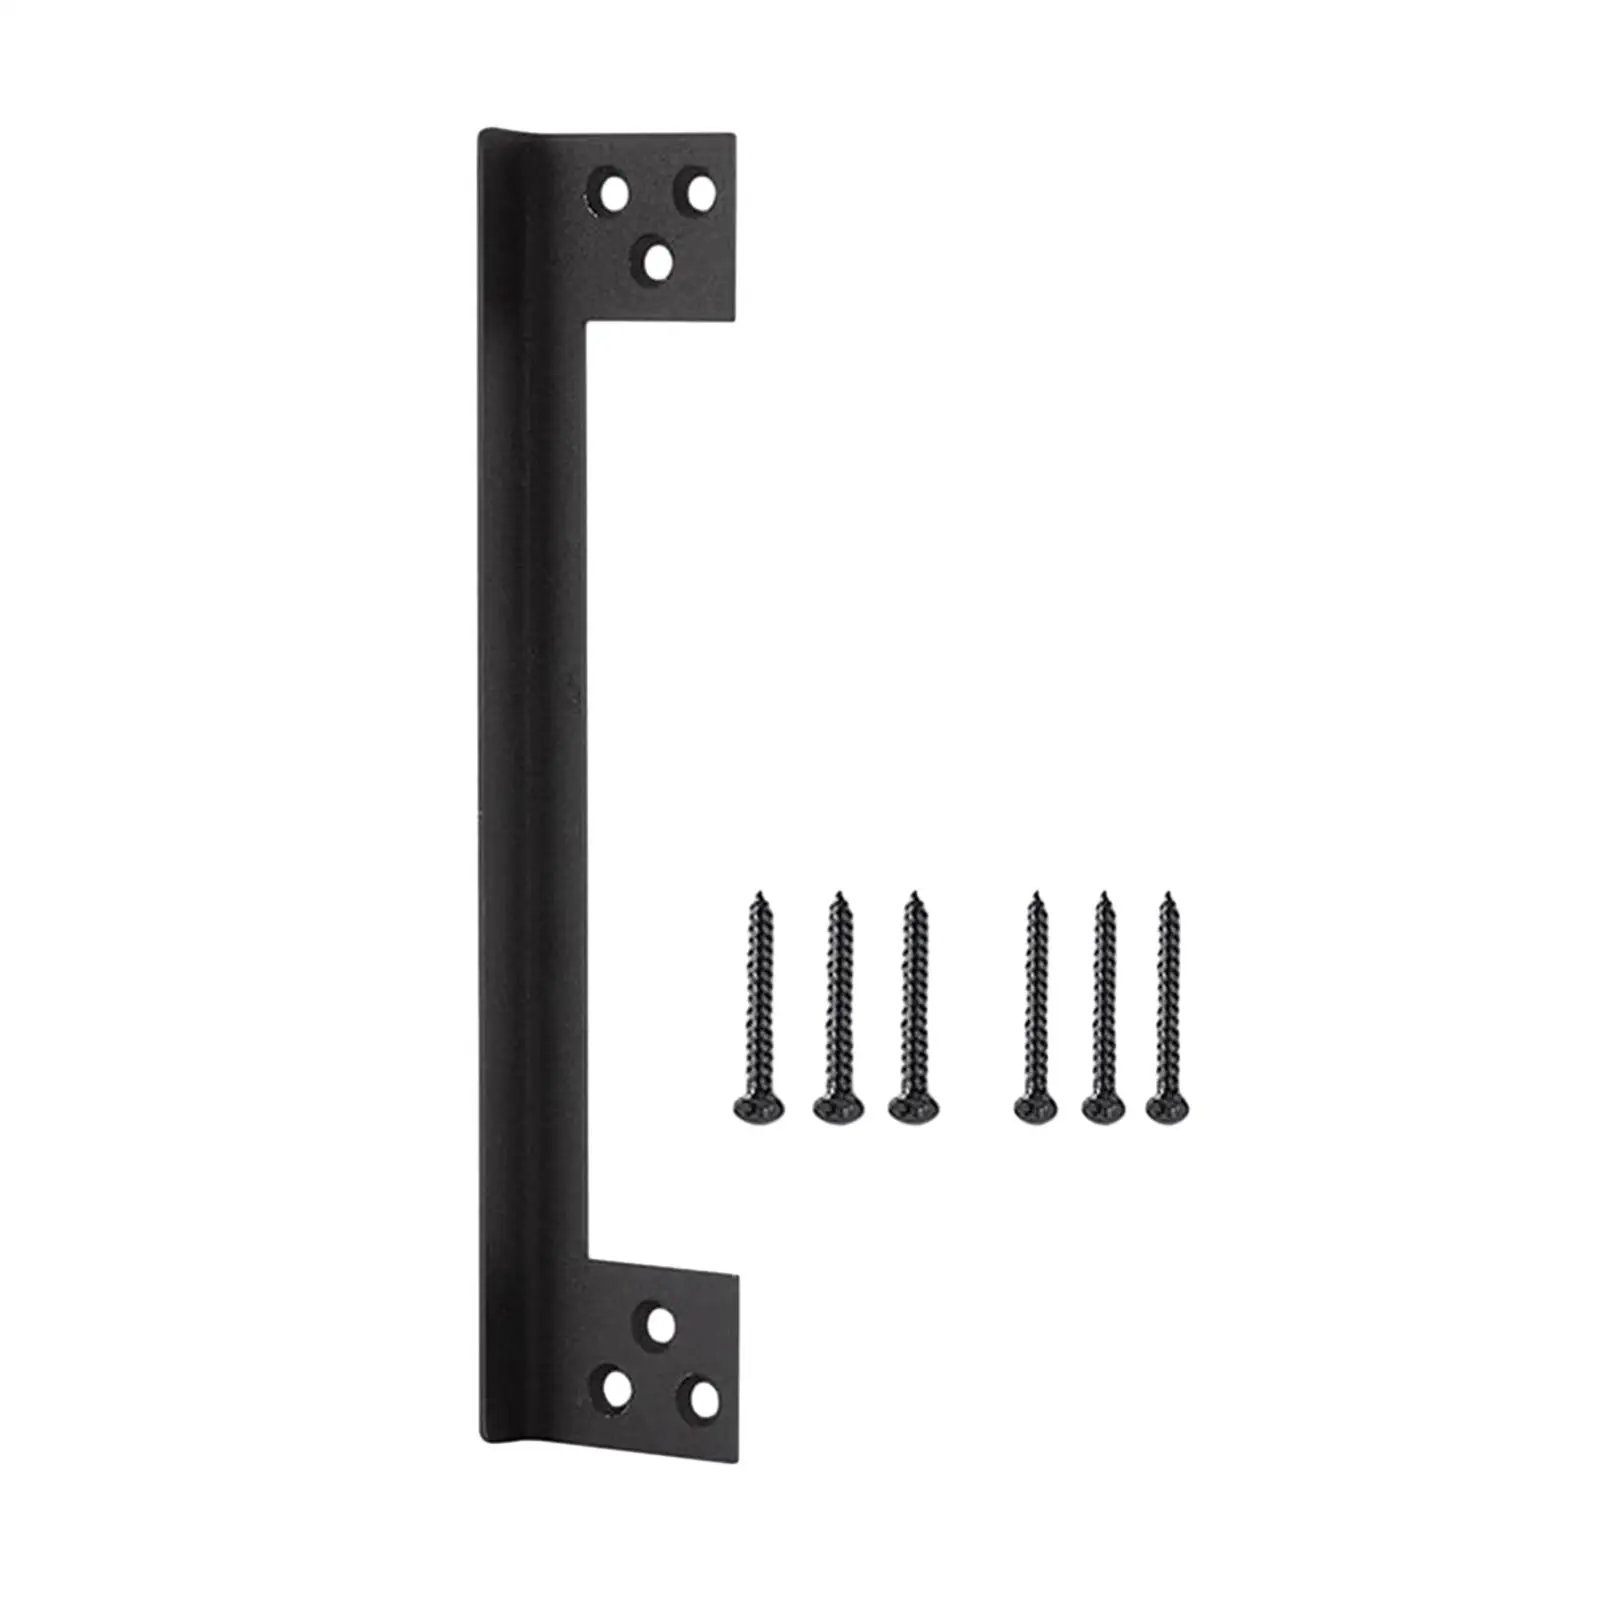 Door Latch Guard Plate Cover Door Lock Latch Sturdy Stainless Steel L Shaped